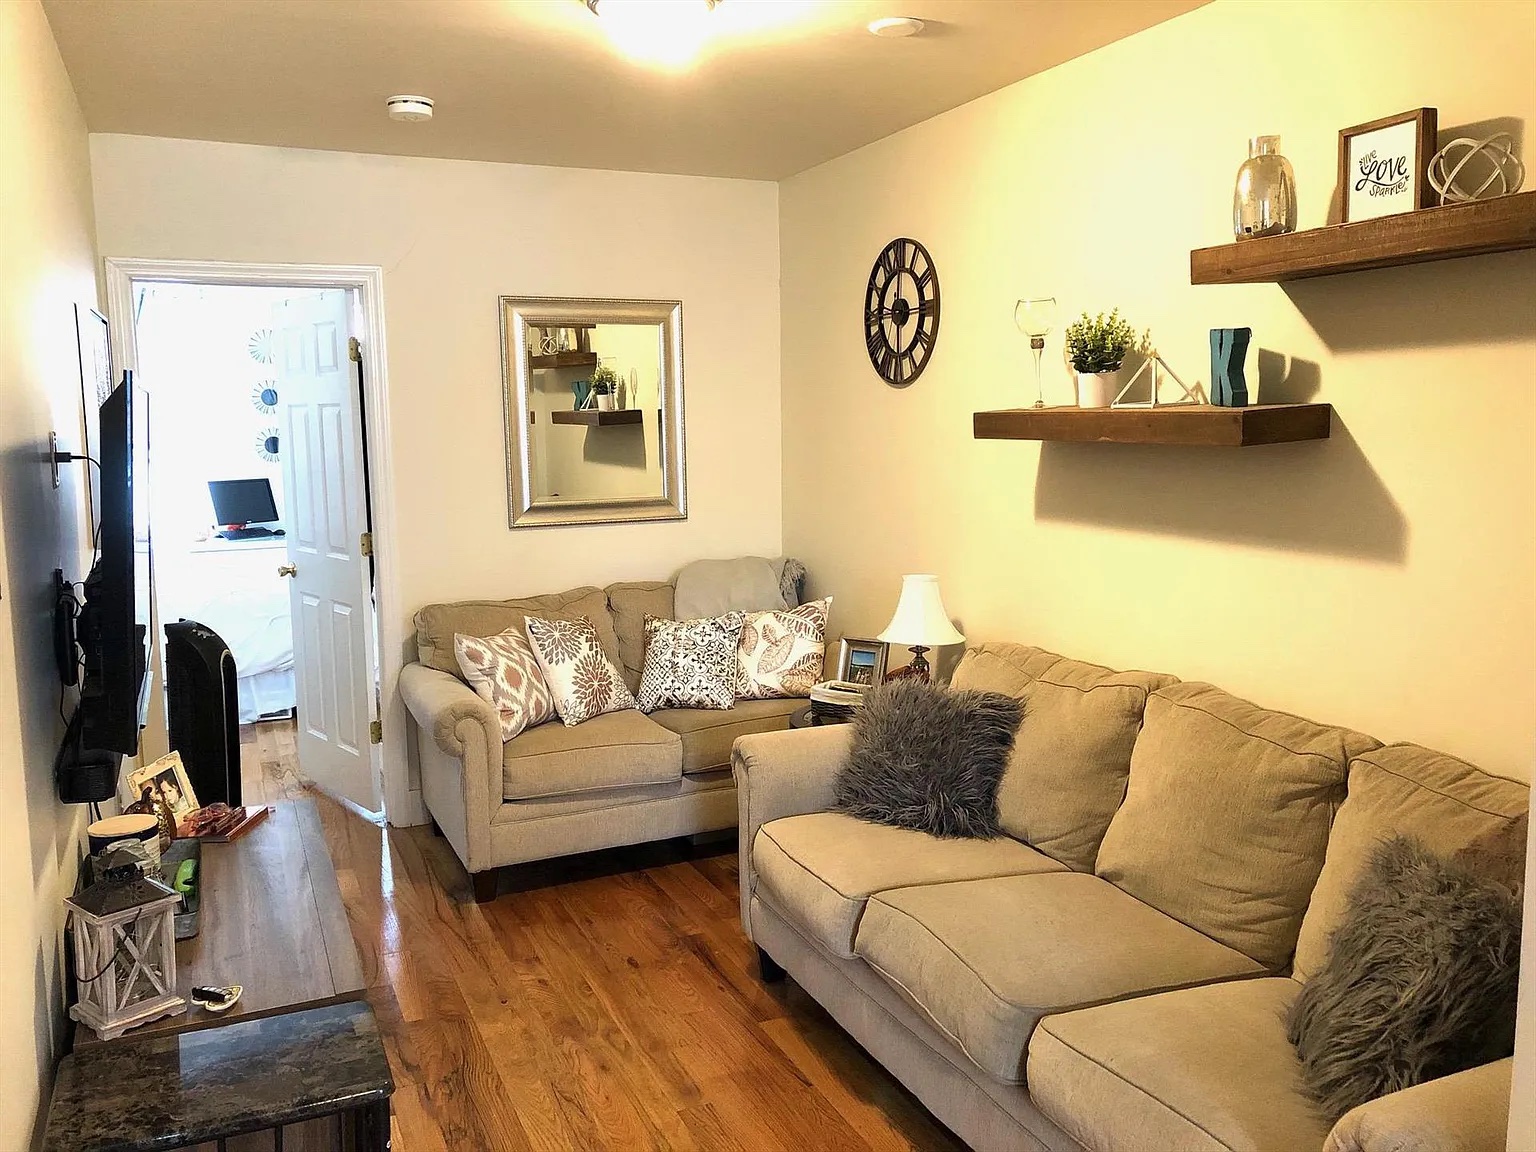 Spacious 1 bedroom layout in Midtown Hoboken! This unit features large bedroom & hardwood floors. This unit will not last! Available June 1st. Broker fee is 10% of annual rent. No pets.